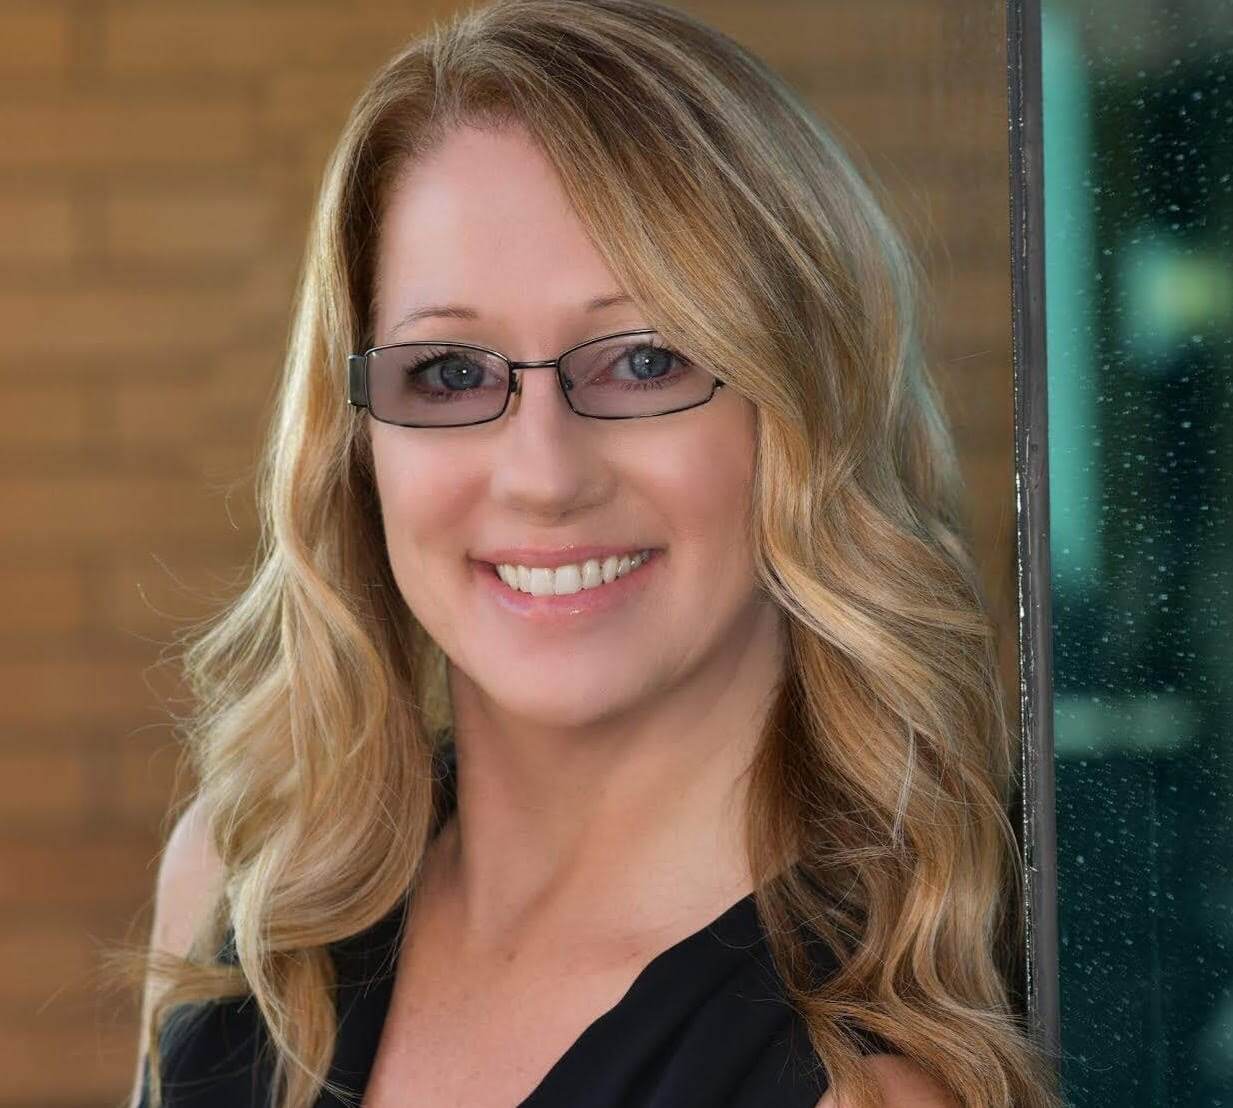 Meet Laura Myers! An interview with Meet Laura Myers, Top Solo Agent. Laura has long blonde hair, is wearing glasses and a dark shirt, and is facing forward while smiling.